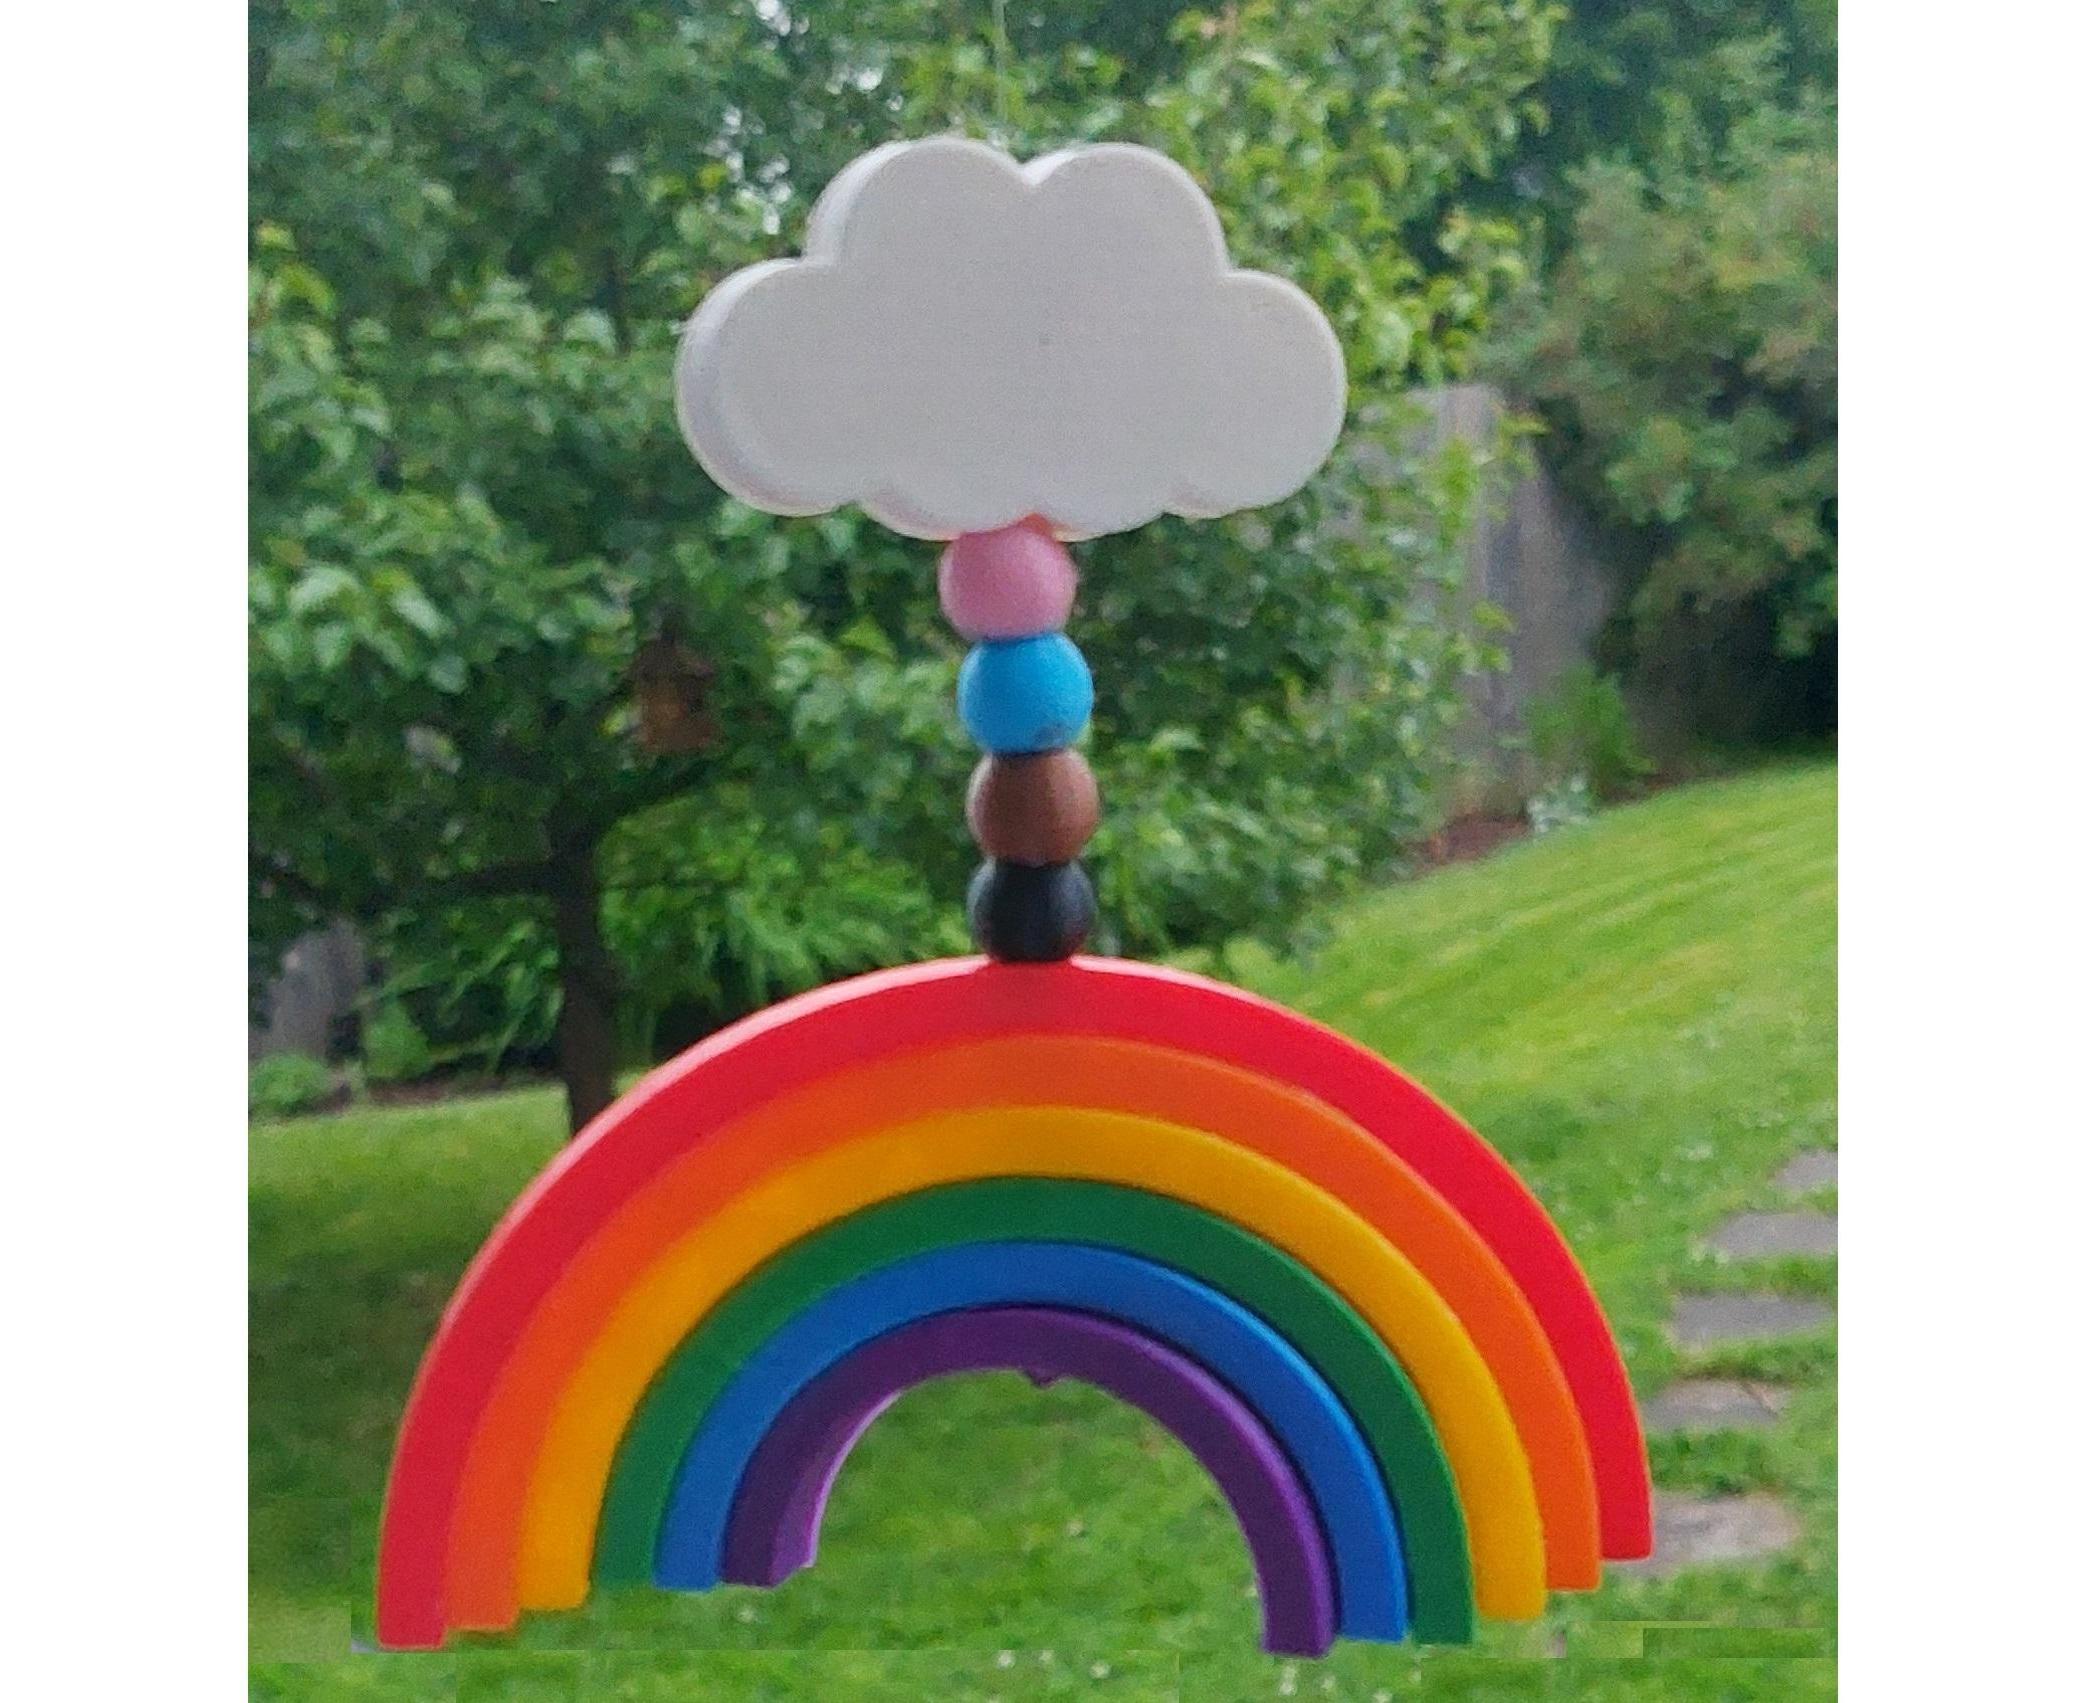 How to Make a Rainbow Mobile in TinkerCad